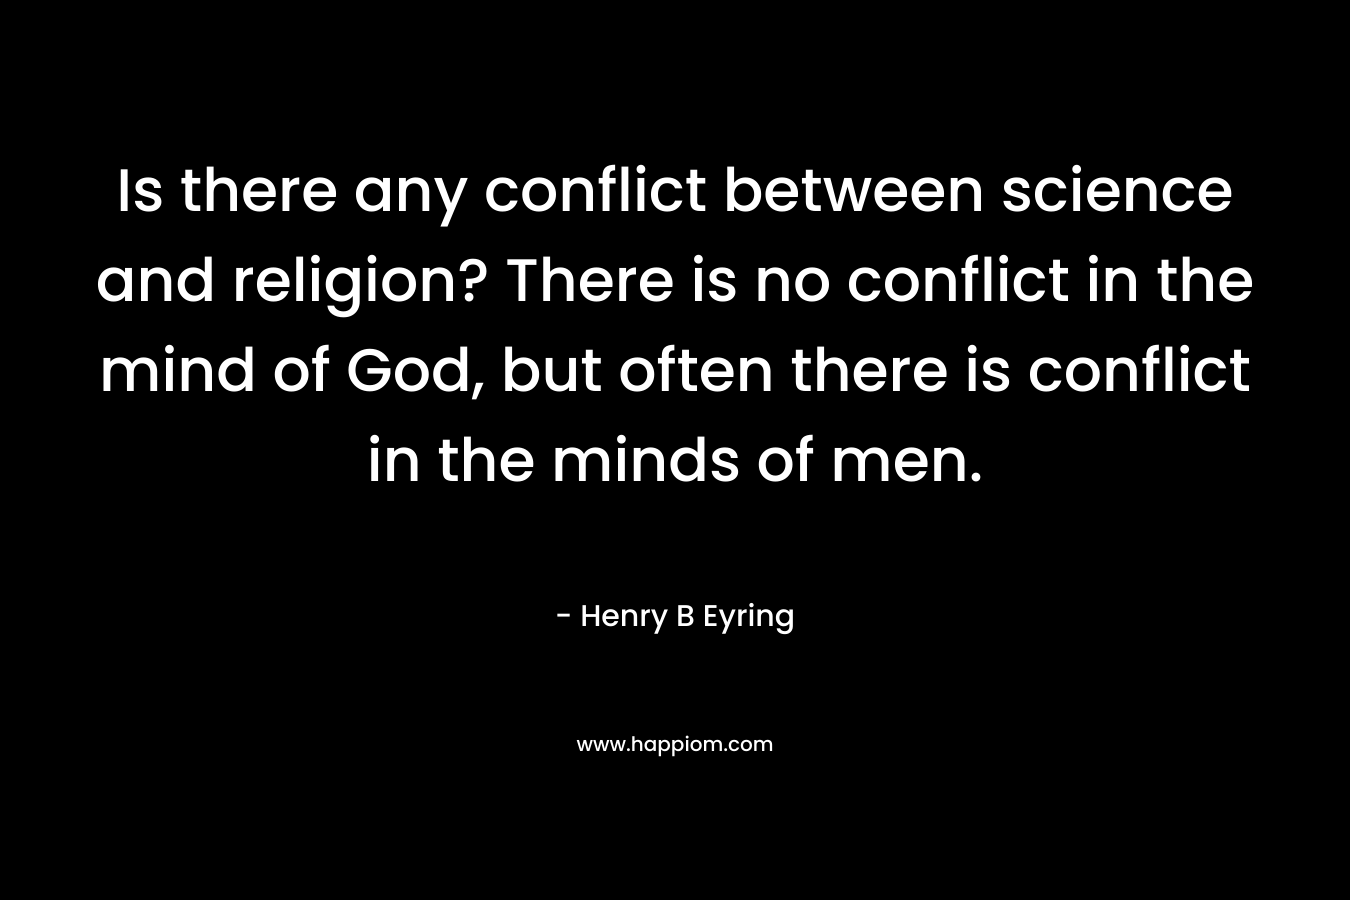 Is there any conflict between science and religion? There is no conflict in the mind of God, but often there is conflict in the minds of men.